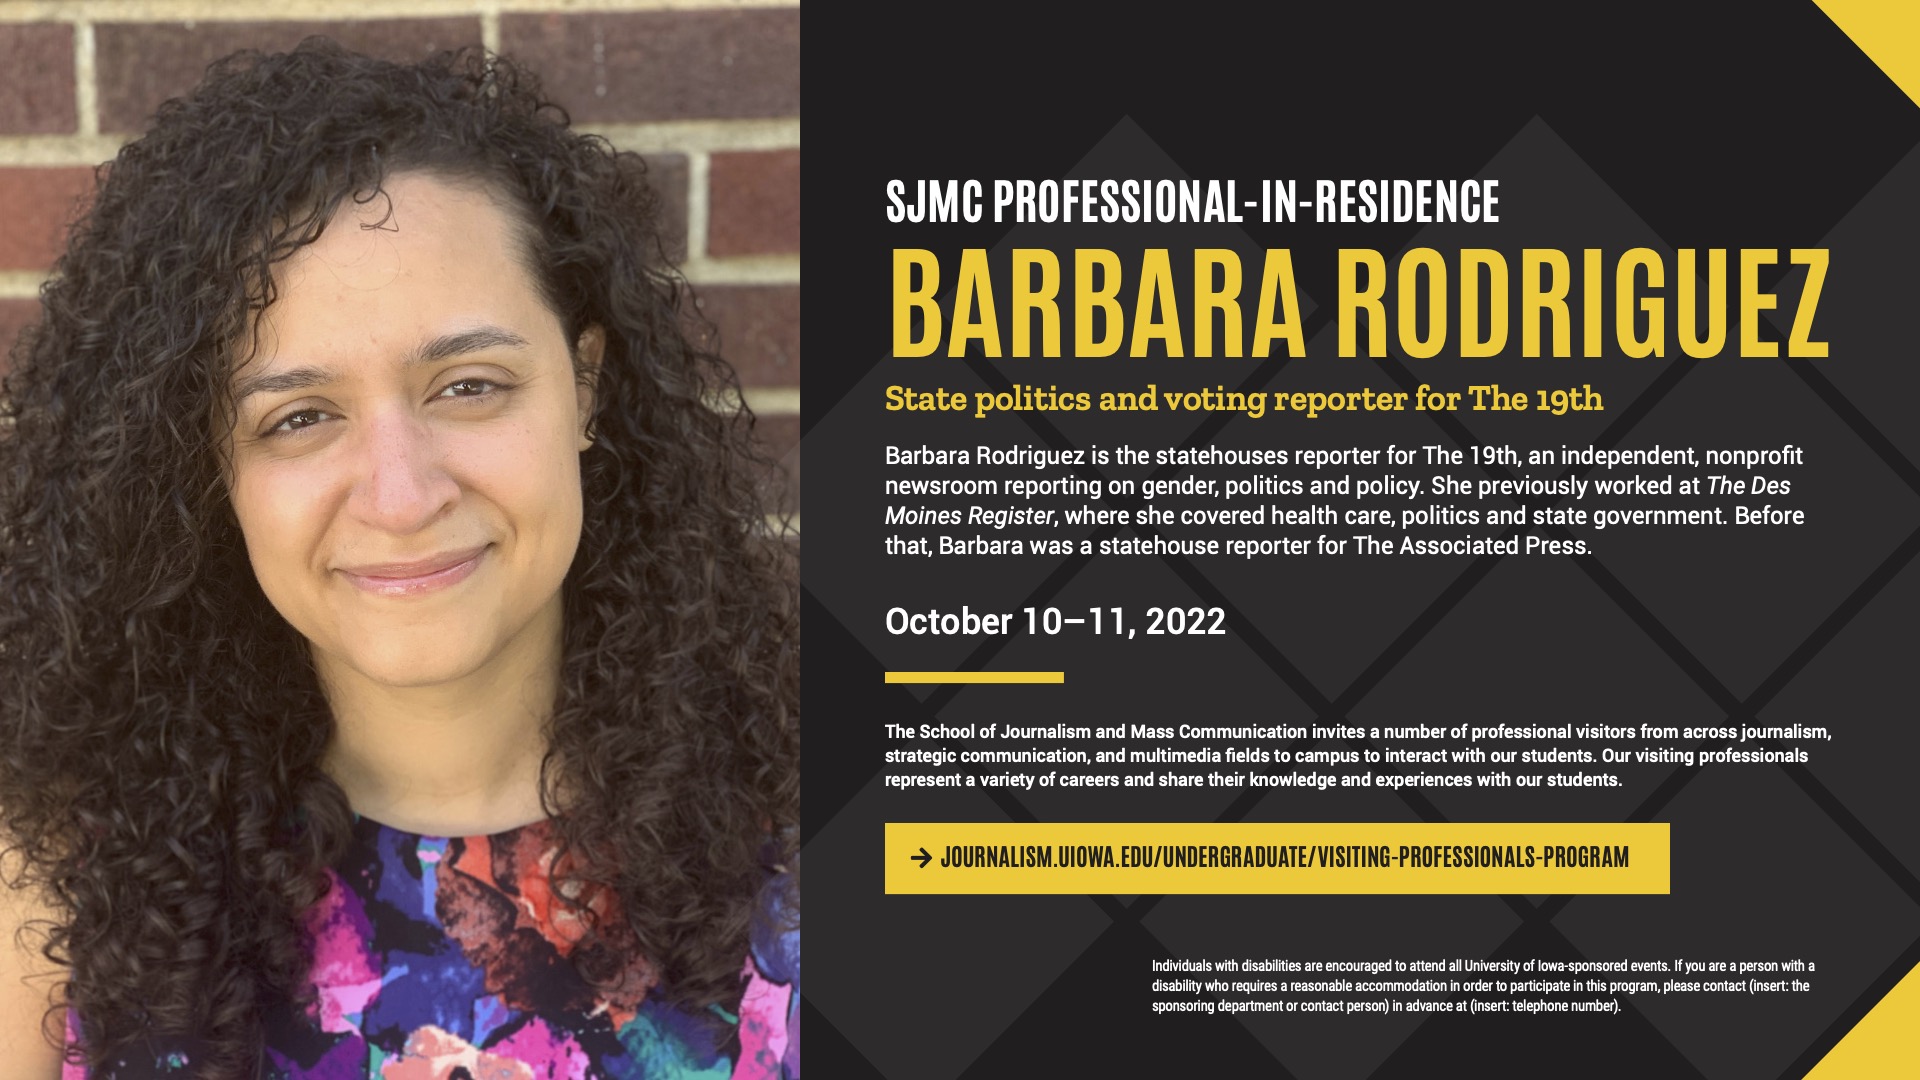 Professional-in-Residence Barbara Rodriguez will Visit Oct 10-11 2022